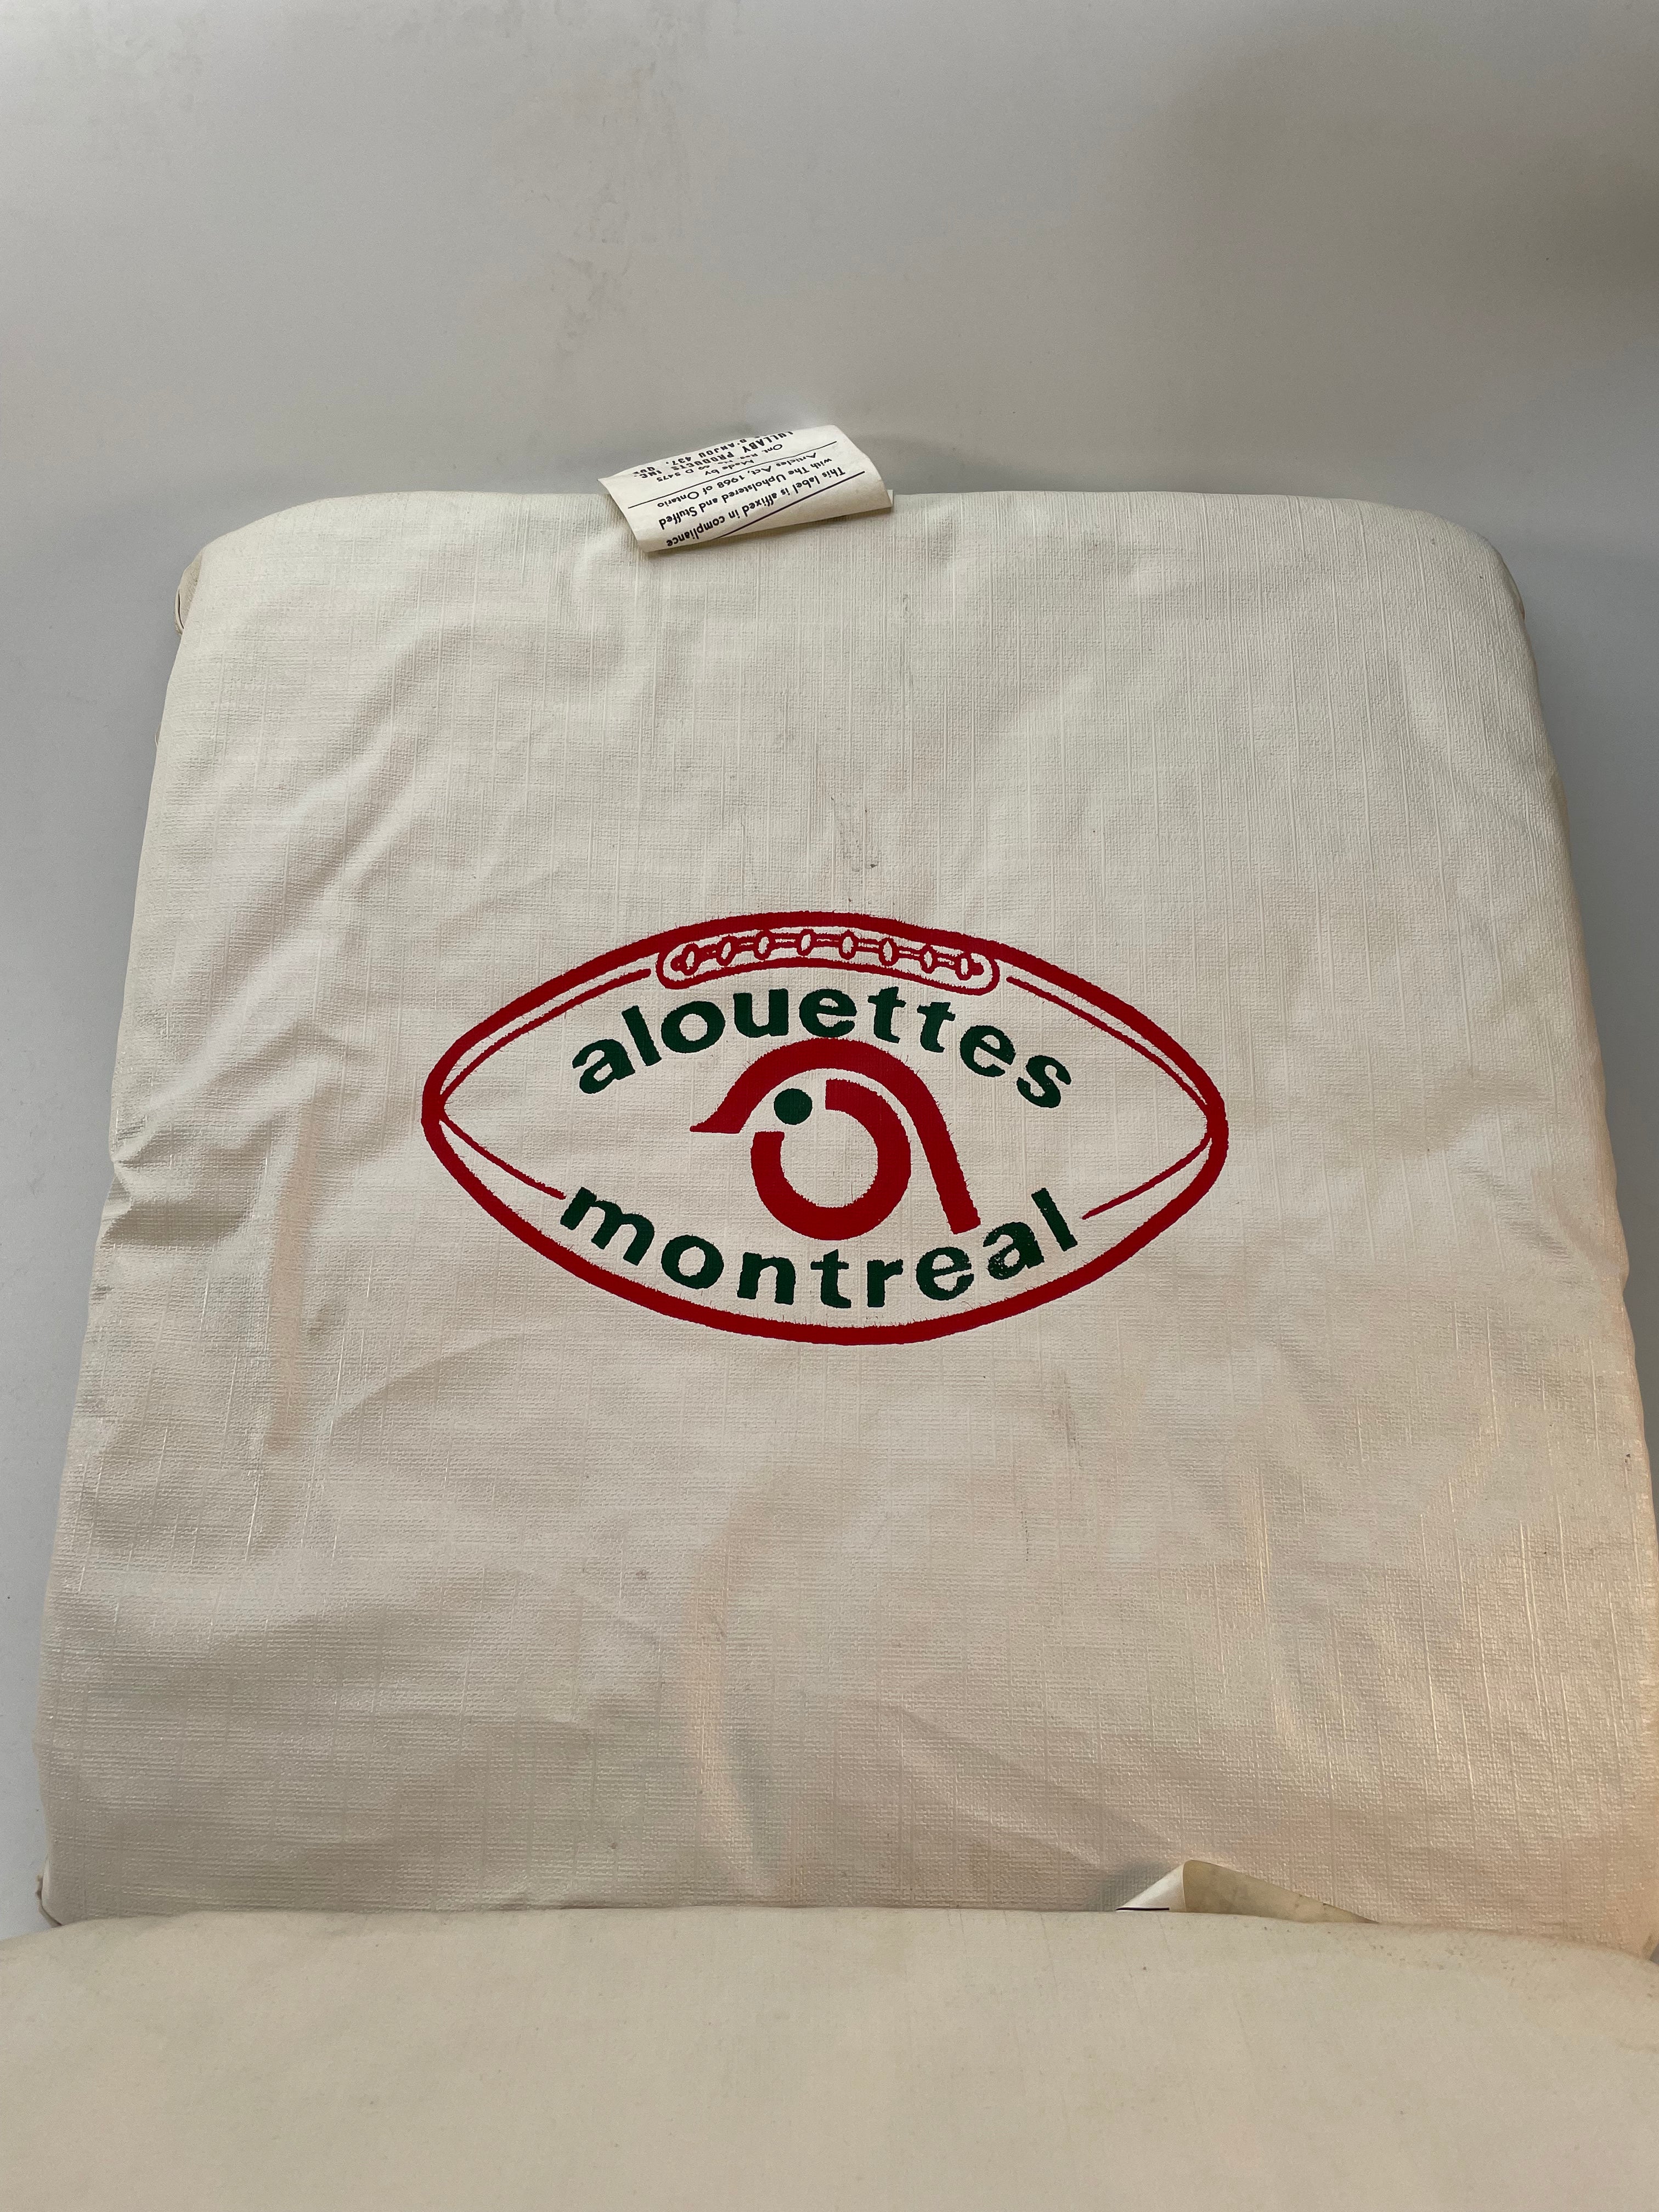 Pair of Authentic Montreal Alouettes Game Seat Cushions from the 1970s